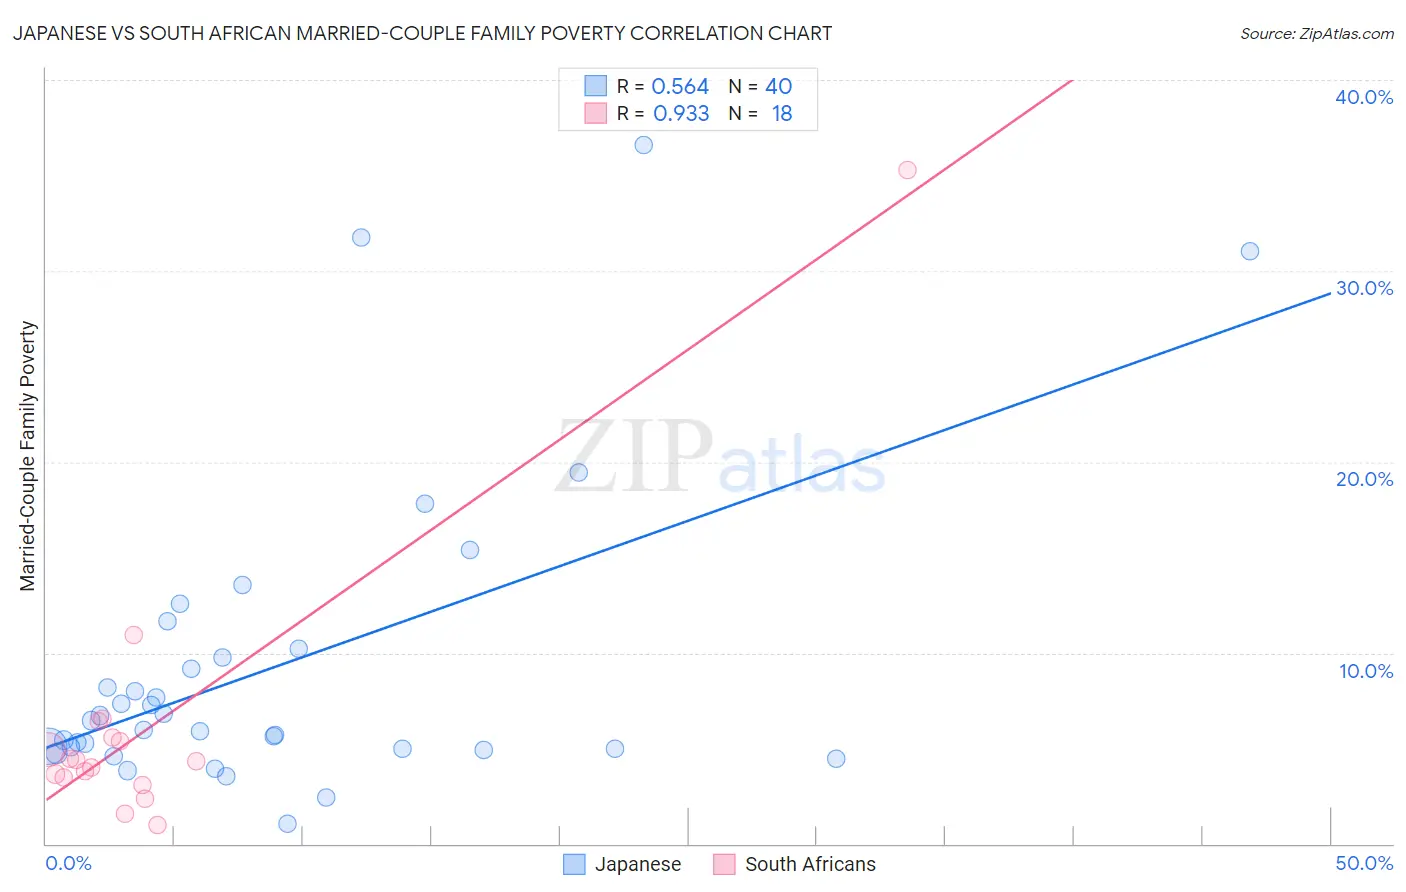 Japanese vs South African Married-Couple Family Poverty